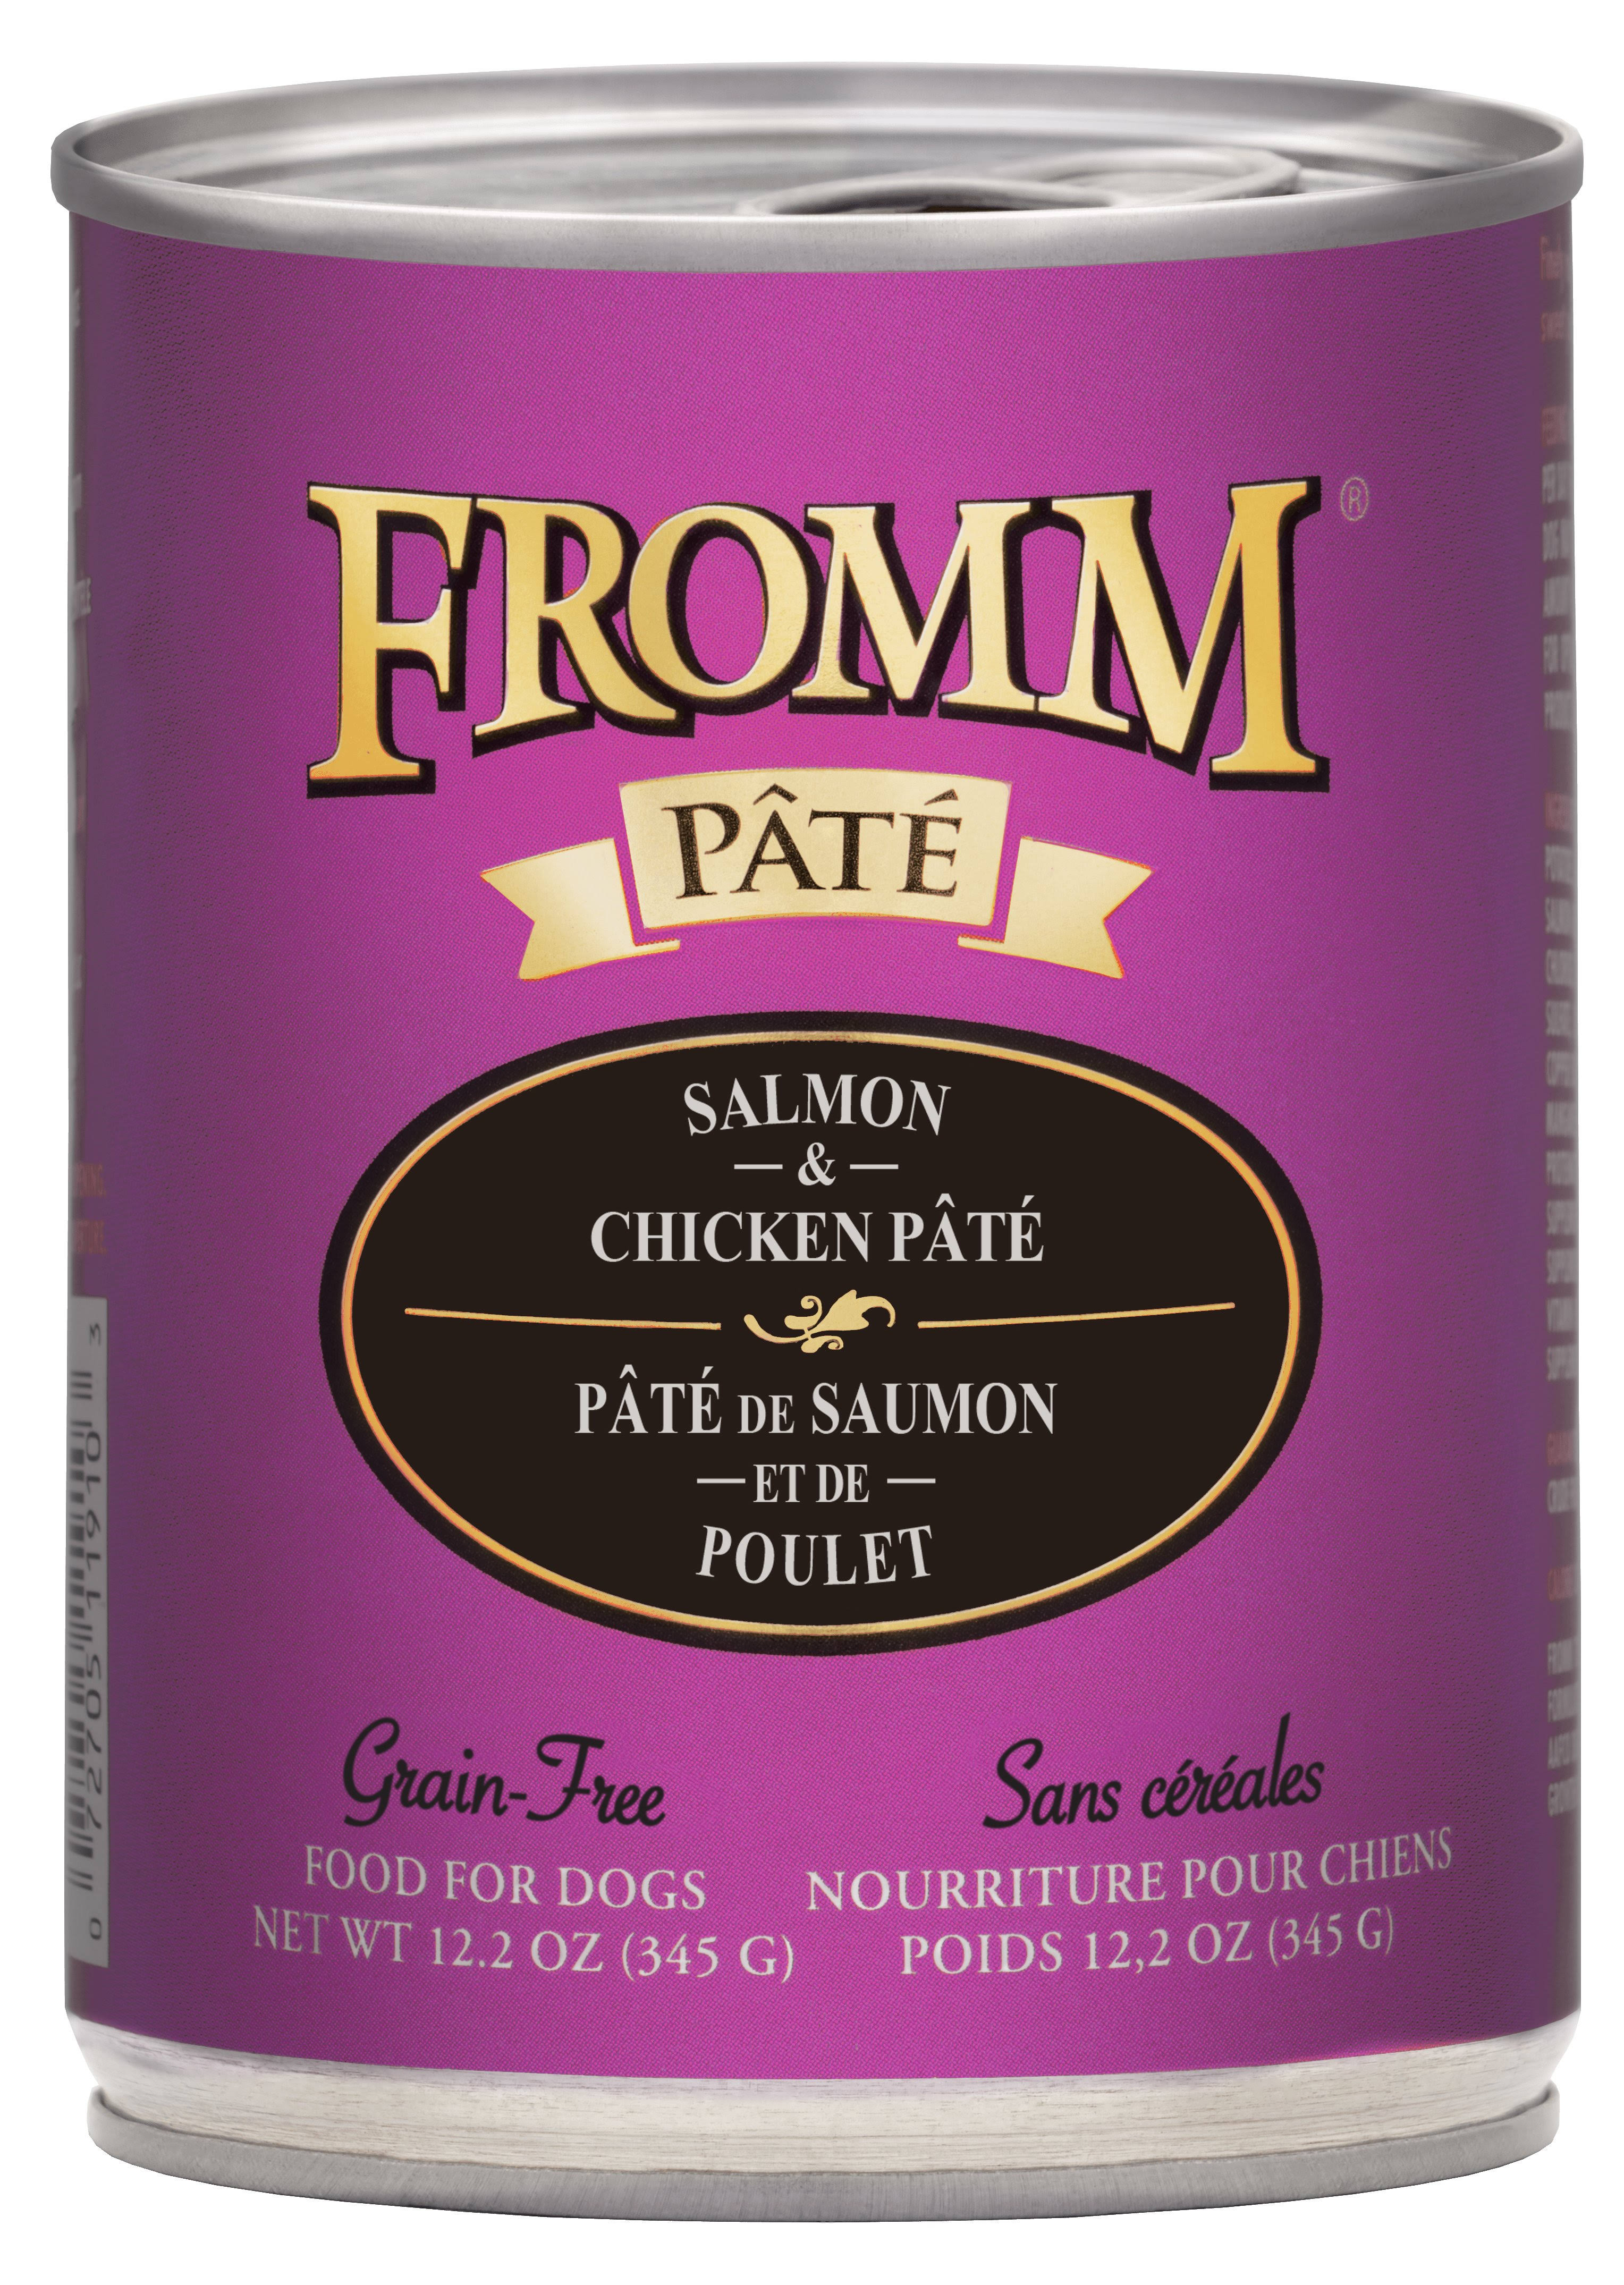 Fromm Gold Salmon & Chicken Pate Dog Food - 12.2 oz